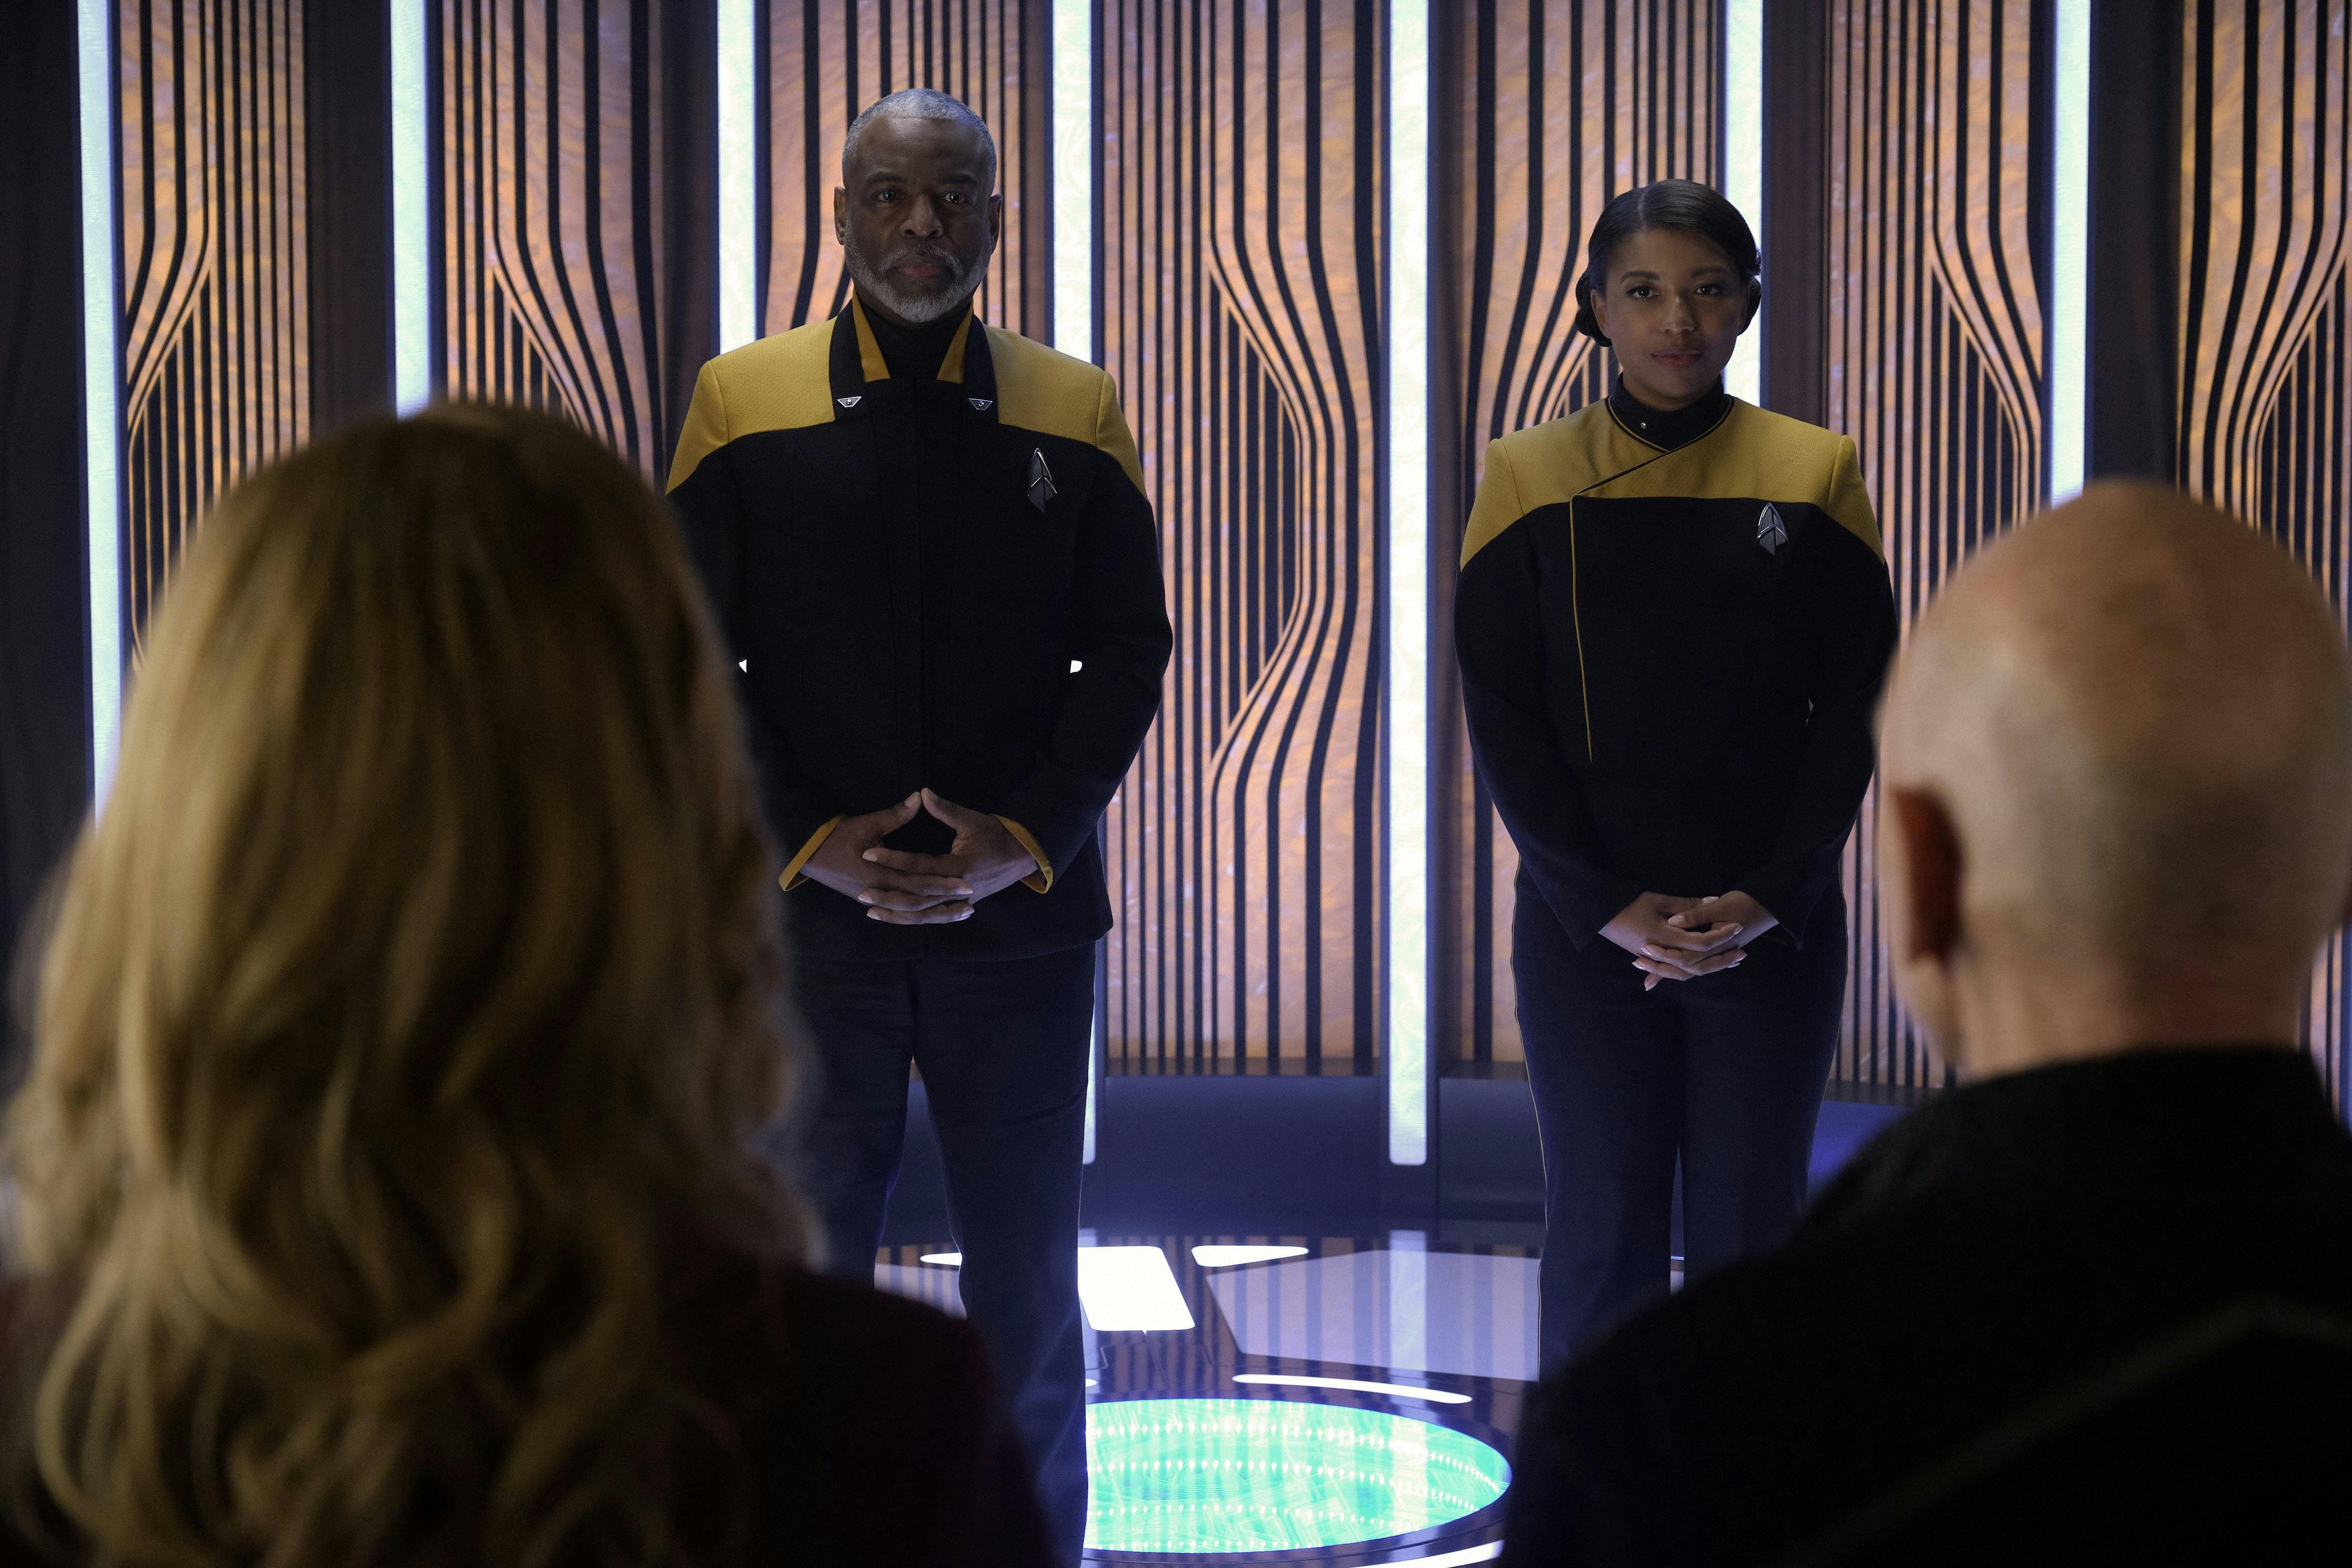 Geordi and Alandra La Forge standing on the transporter looking at Seven of Nine and Picard in front of them